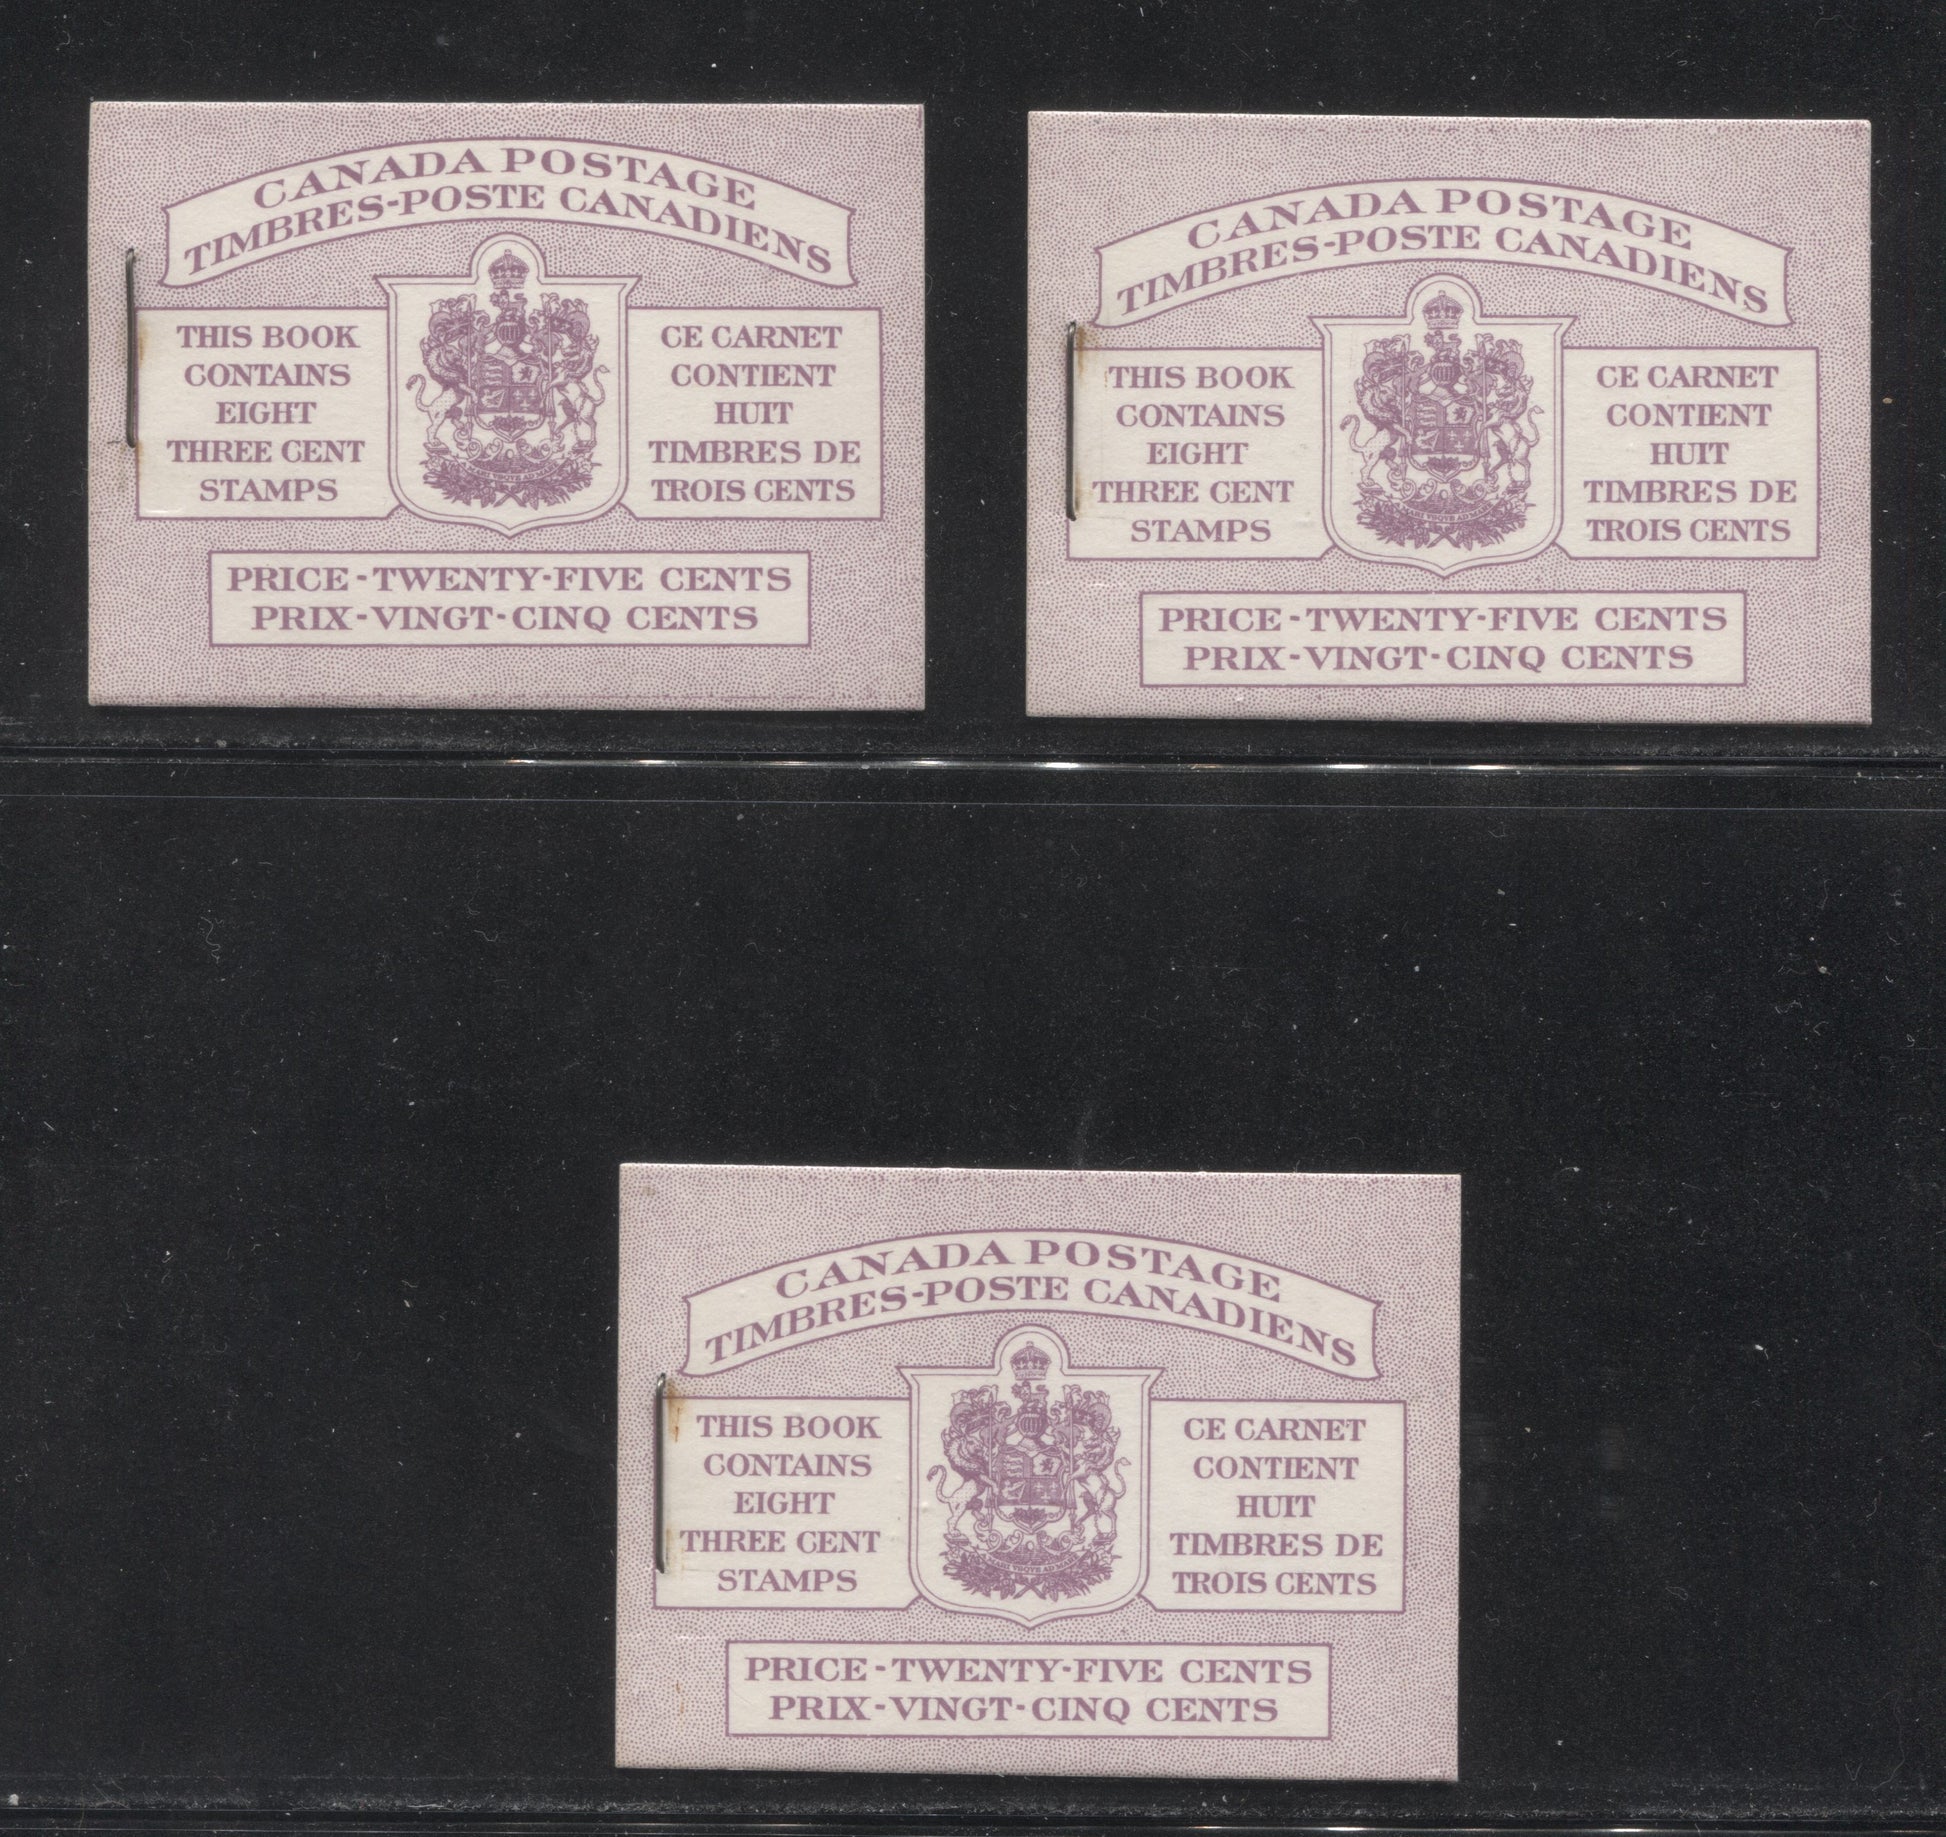 Canada #BK46 1953-1954 Karsh Issue Complete 25c, Bilingual Booklet Containing 2 Panes of 4 + 2 Labels of the 3c Cerise Queen Elizabeth II - Harris Cover Types IIIcGi, IIIdGi and IIIdGii Showing Horizontal Cutting Guidelines on the Front Cover Brixton Chrome 